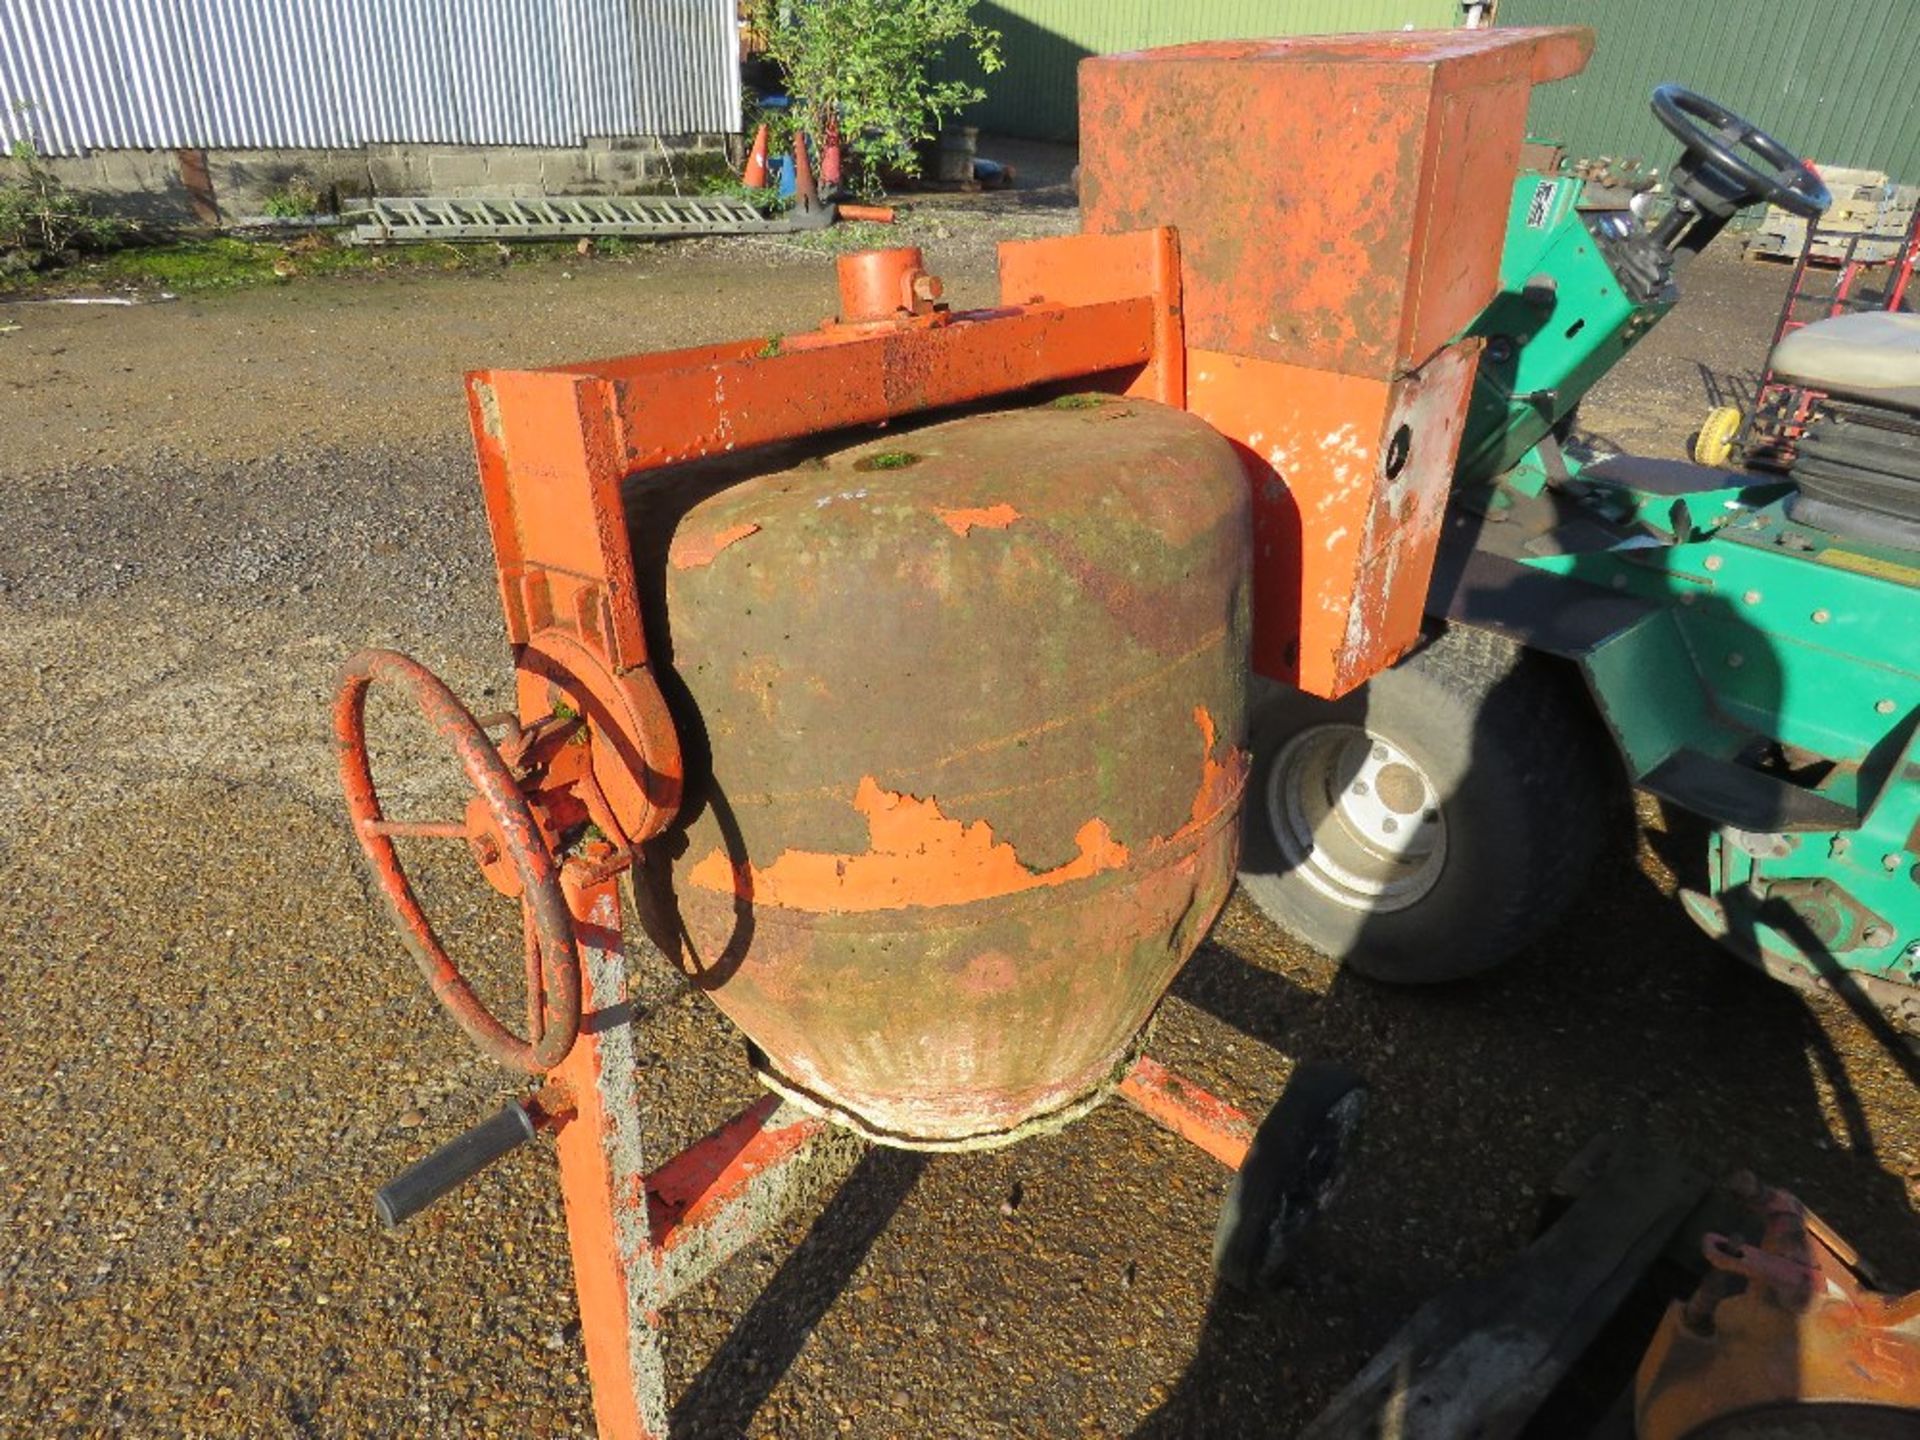 SMALL SIZED PETROL ENGINED CEMENT MIXER. - Image 4 of 4